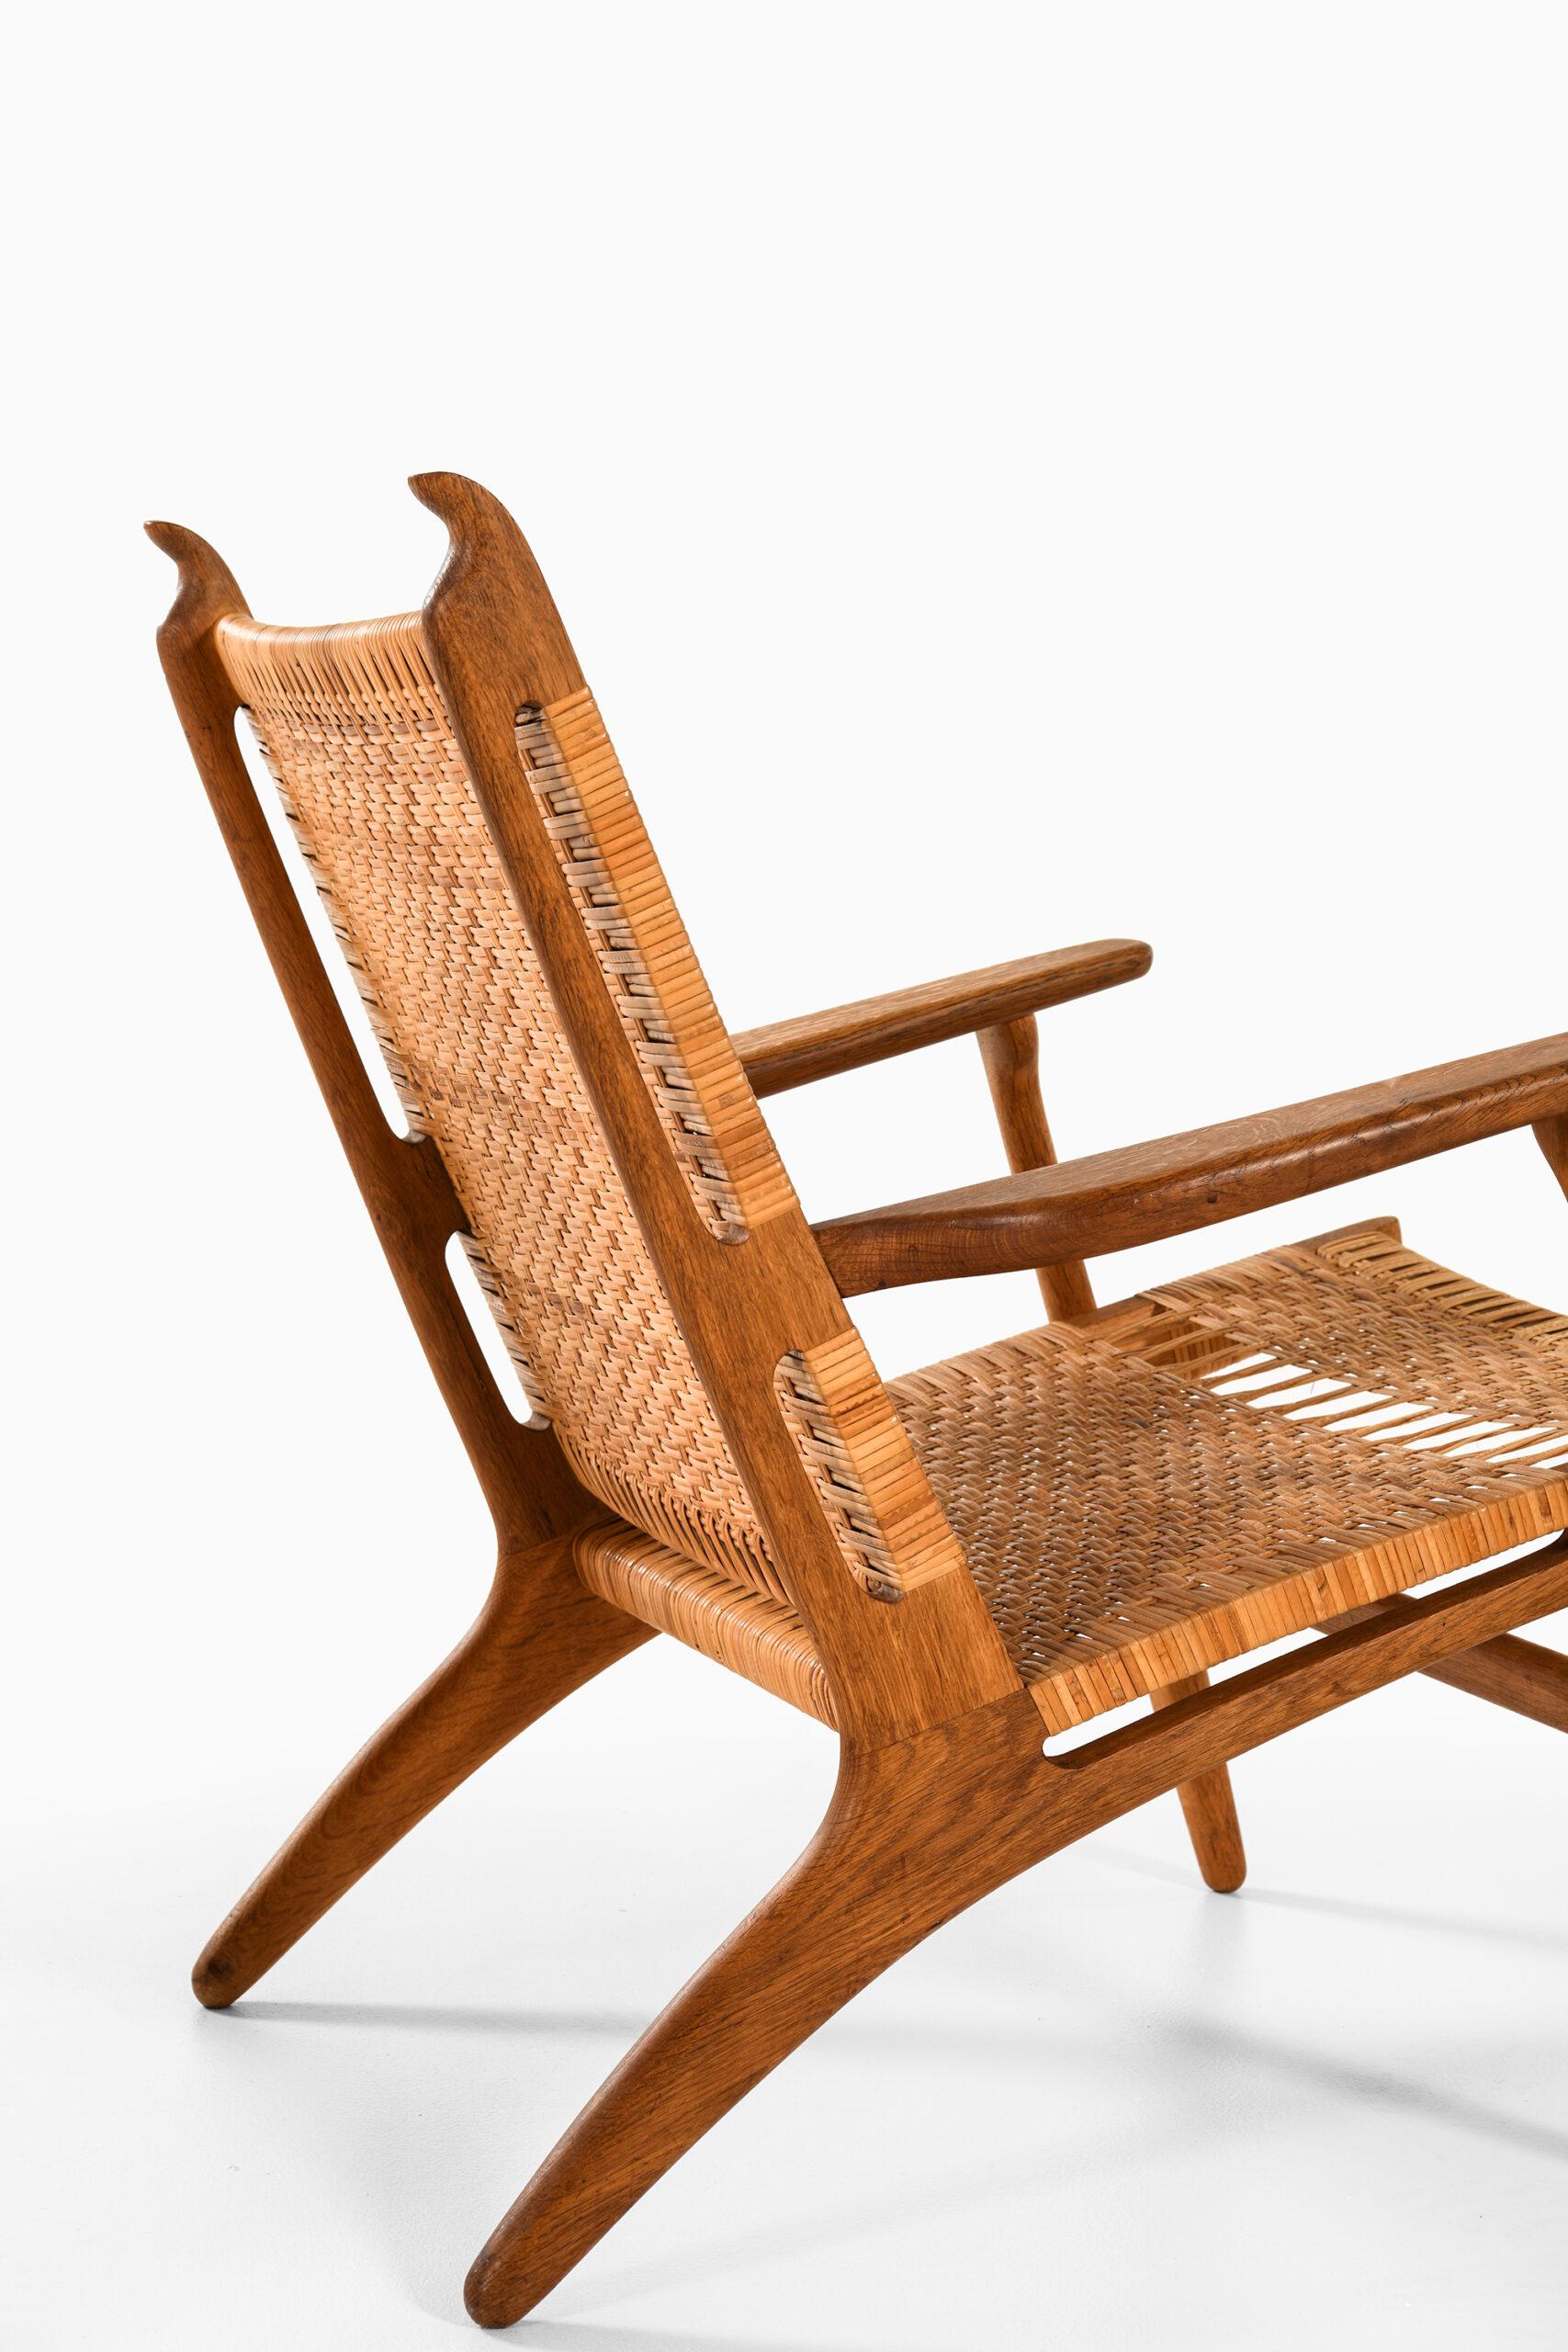 Rare pair of easy chairs model CH-27 designed by Hans Wegner. Produced by Carl Hansen & Son in Denmark.